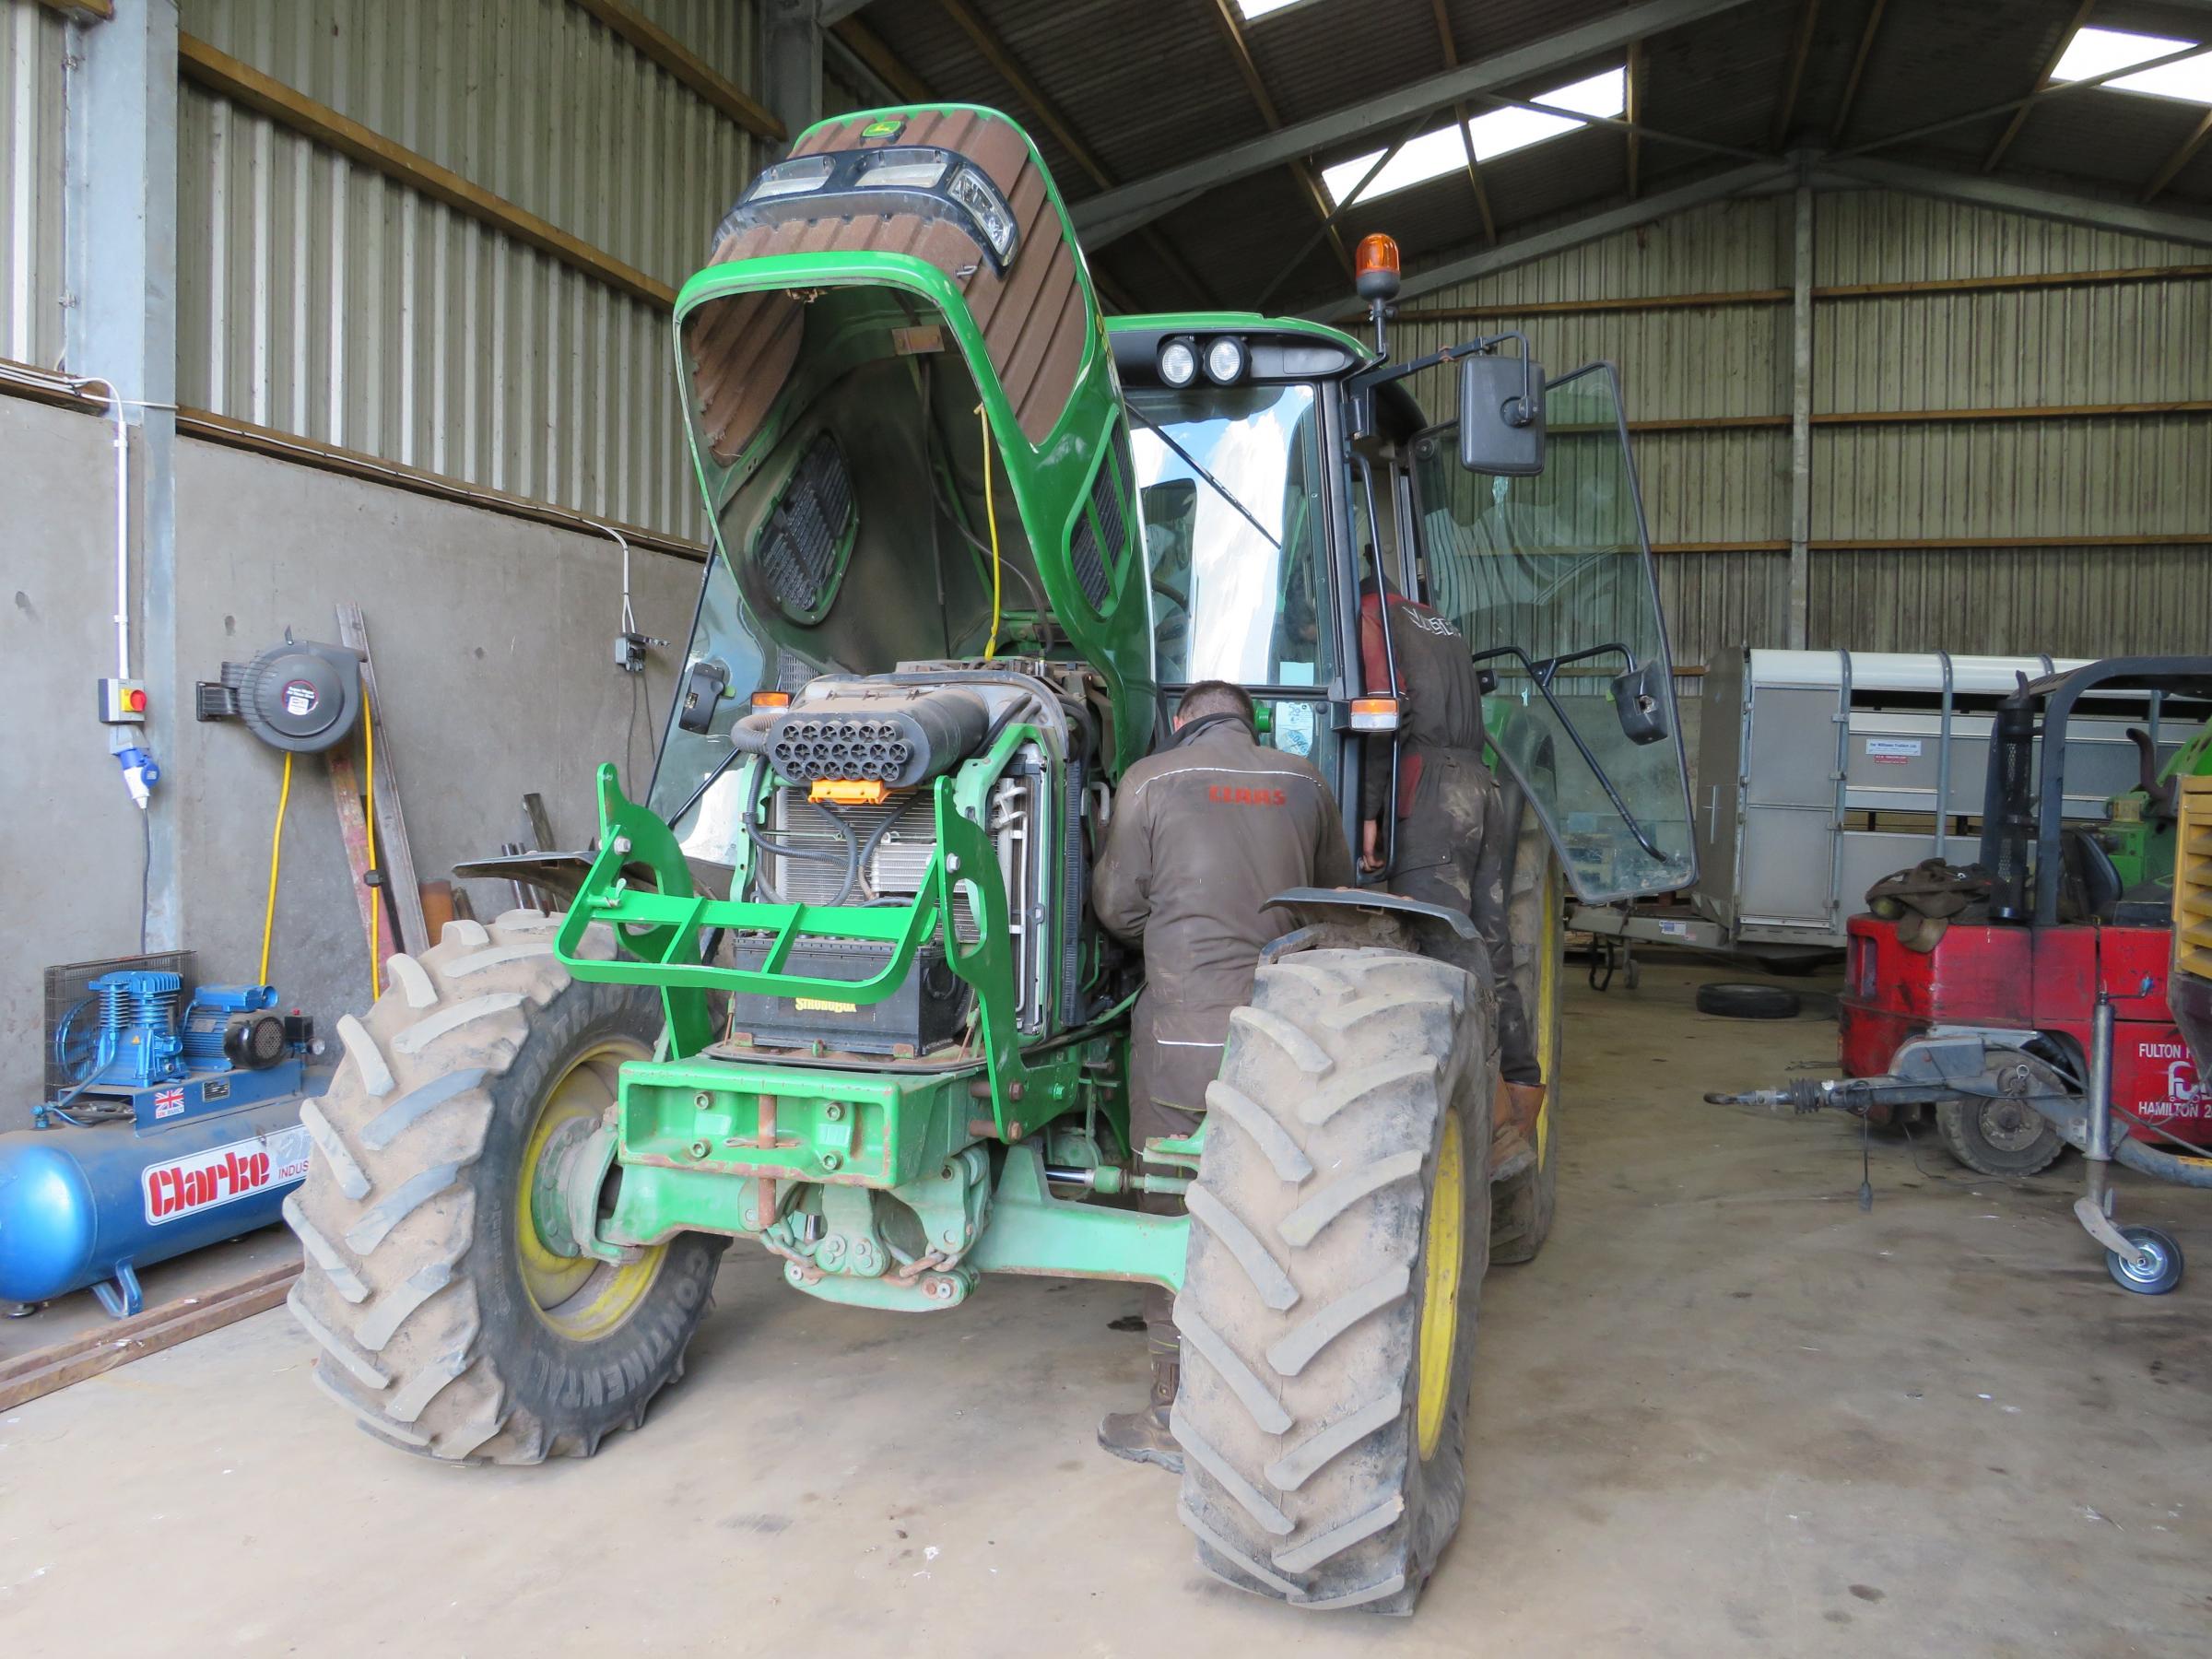 Scott and Andrew doing some repairs on a John Deere tractor